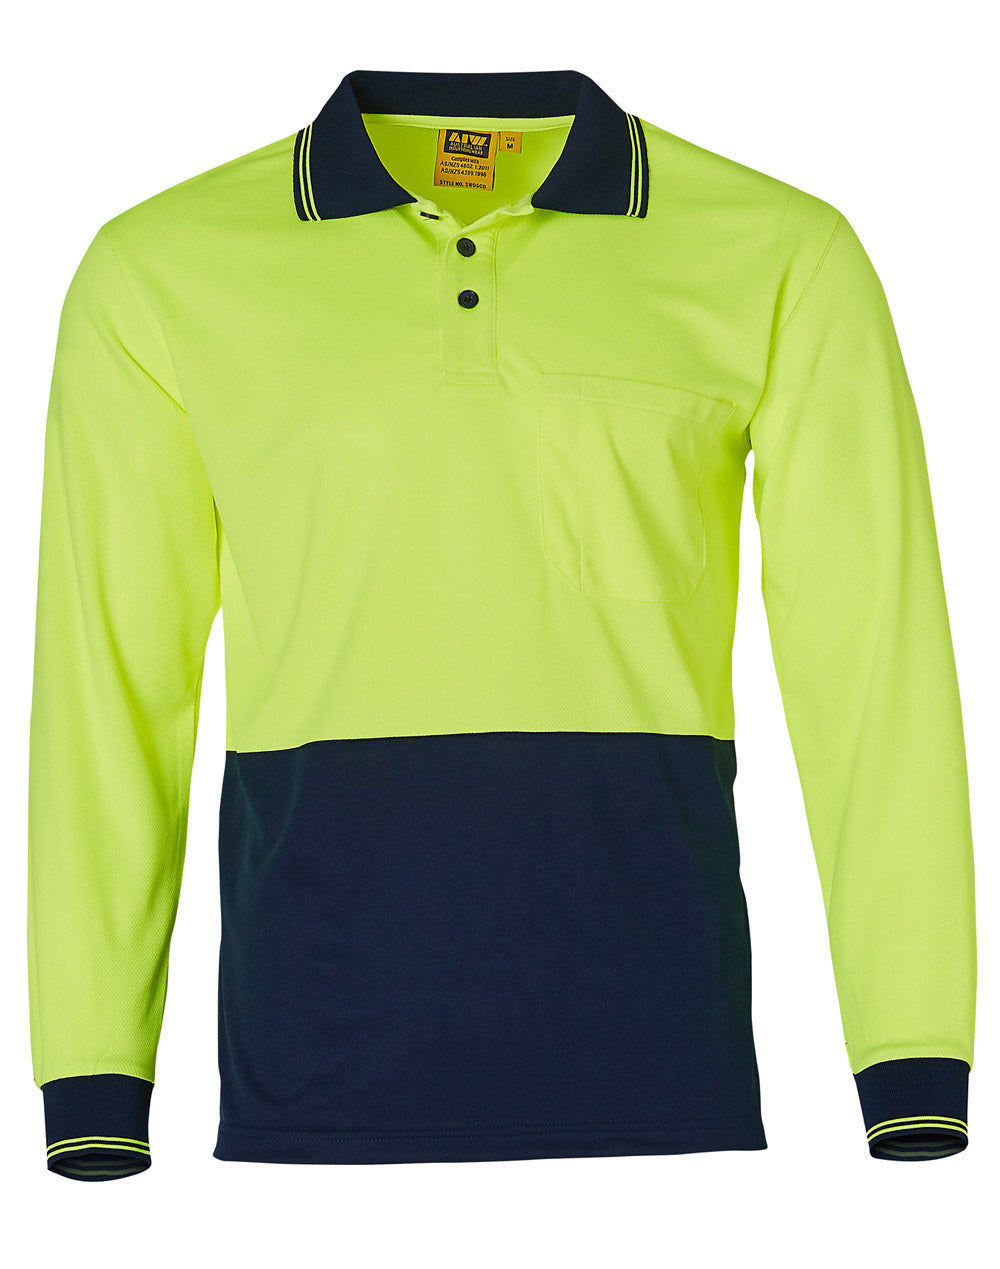 Winning Spirit-Hi Visibility Long Sleeve CoolDry Micro-mesh Safety Polo-SW05CD